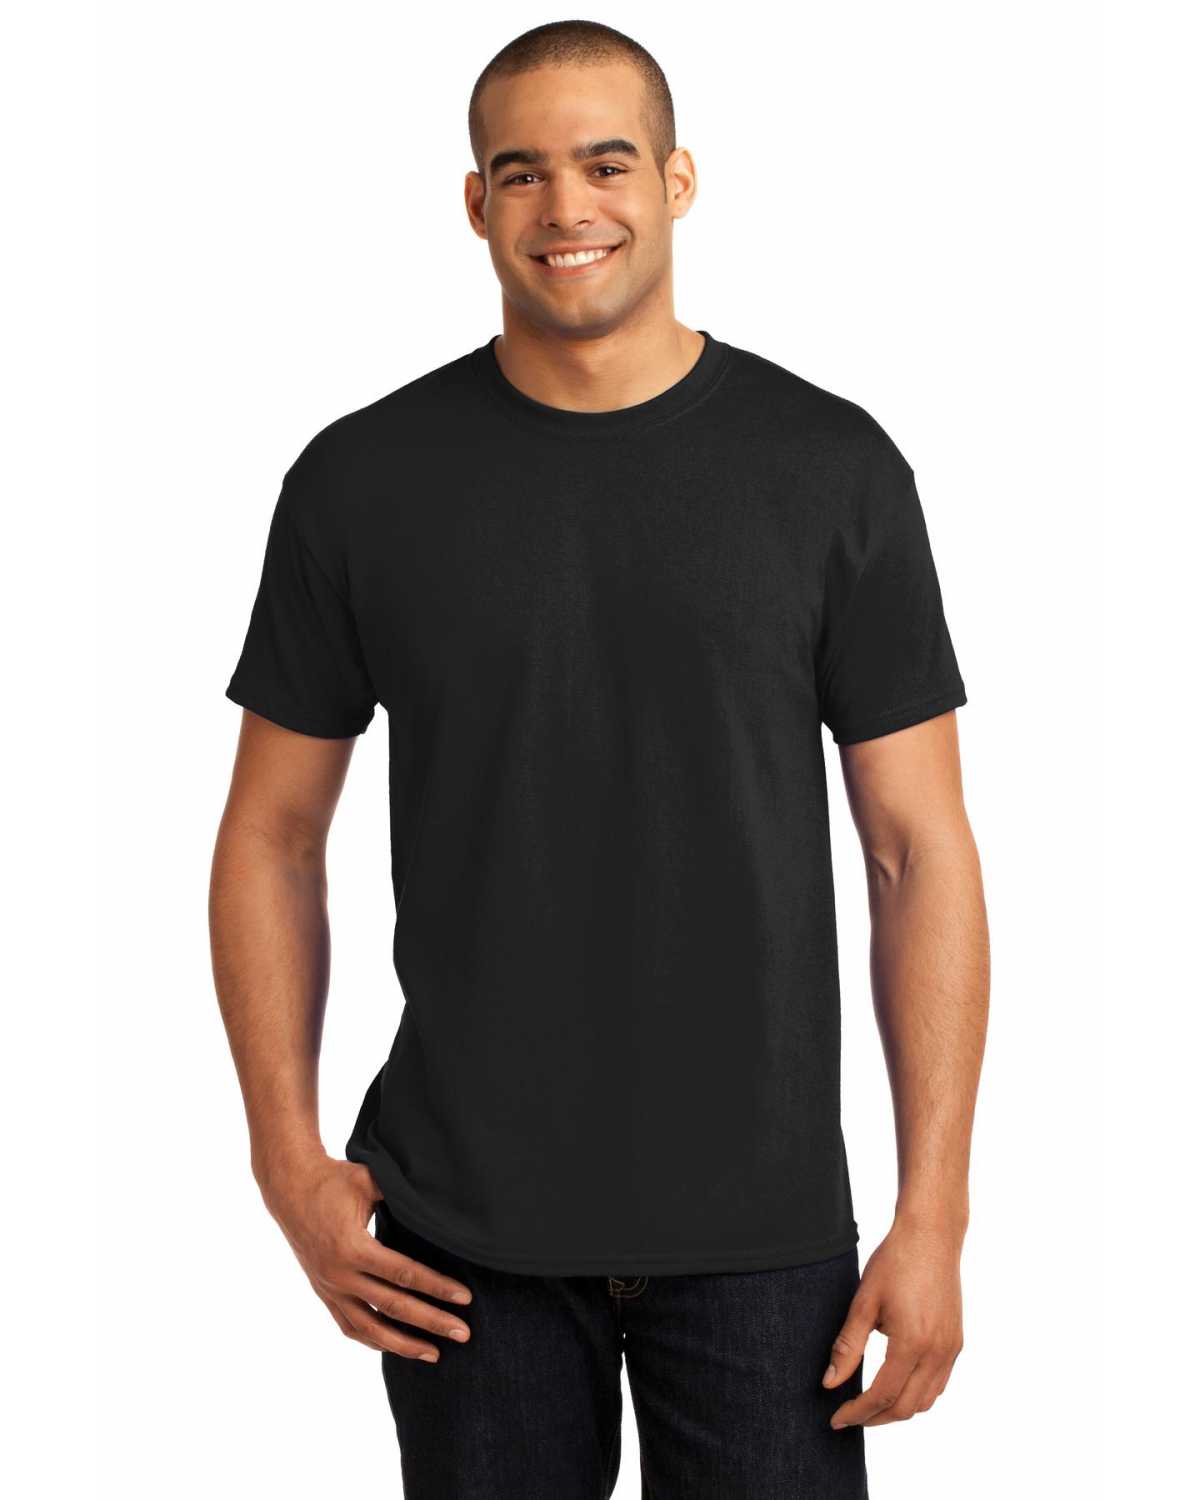 Hanes 5170 EcoSmart 50/50 Cotton/Poly T-Shirt on discount ...